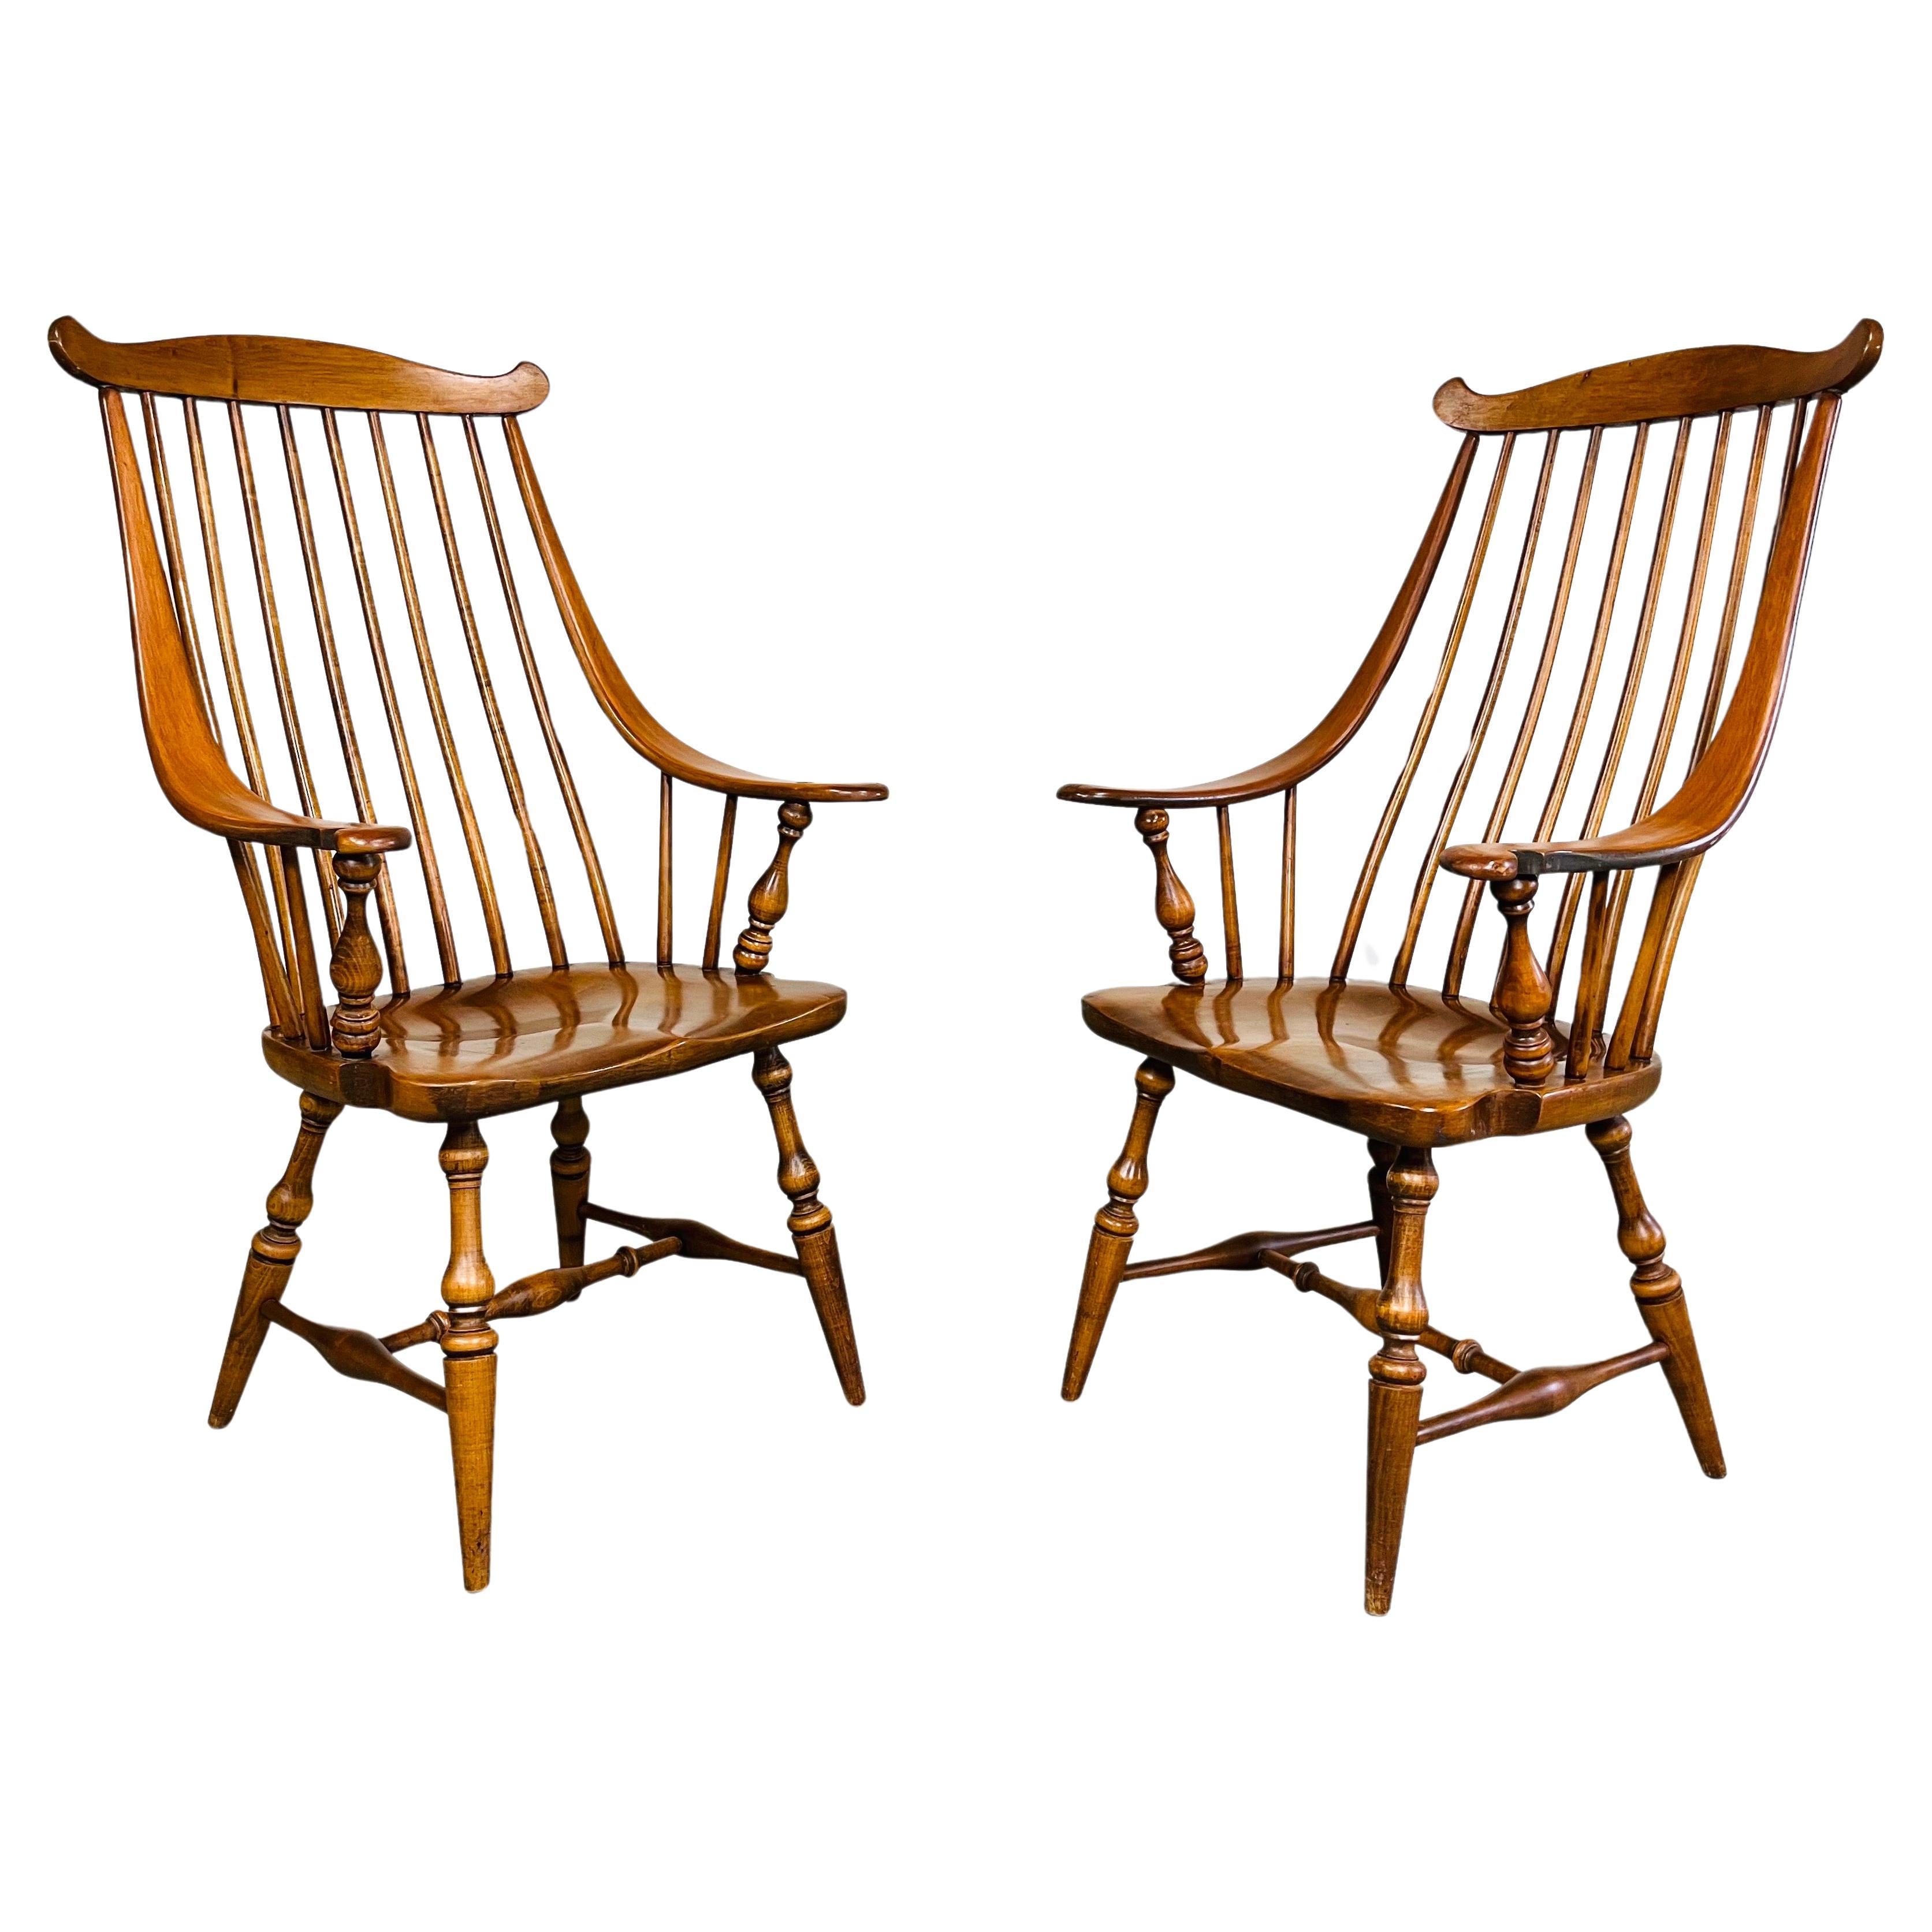 Spindle Fan-Back Windsor Chairs By Heywood Wakefield 